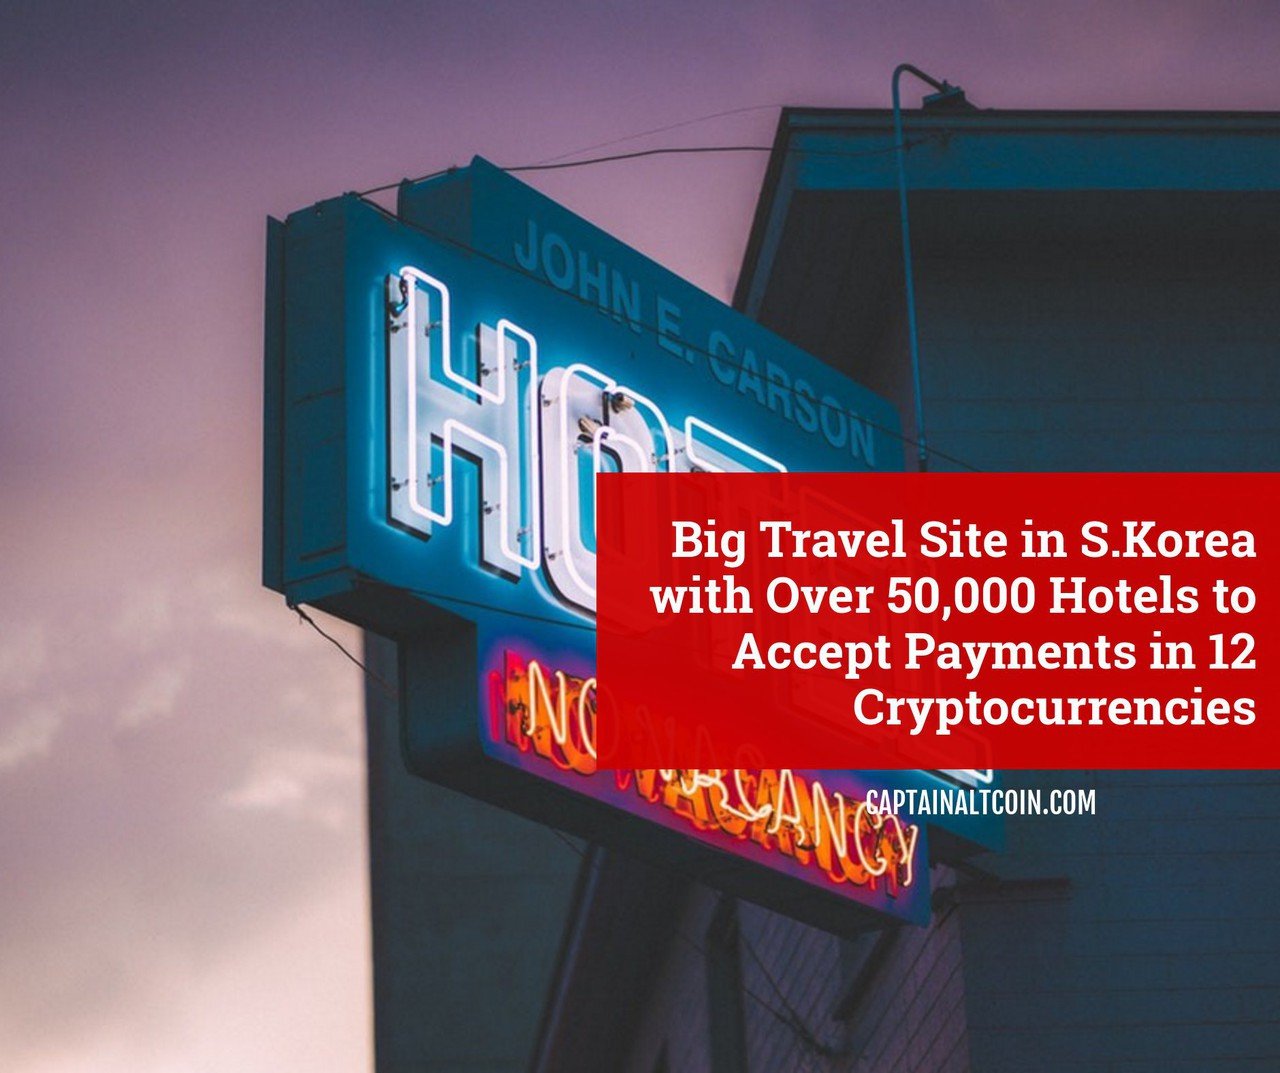 Big Travel Site in S.Korea with Over 50,000 Hotels to Accept Payments in 12 Cryptocurrencies